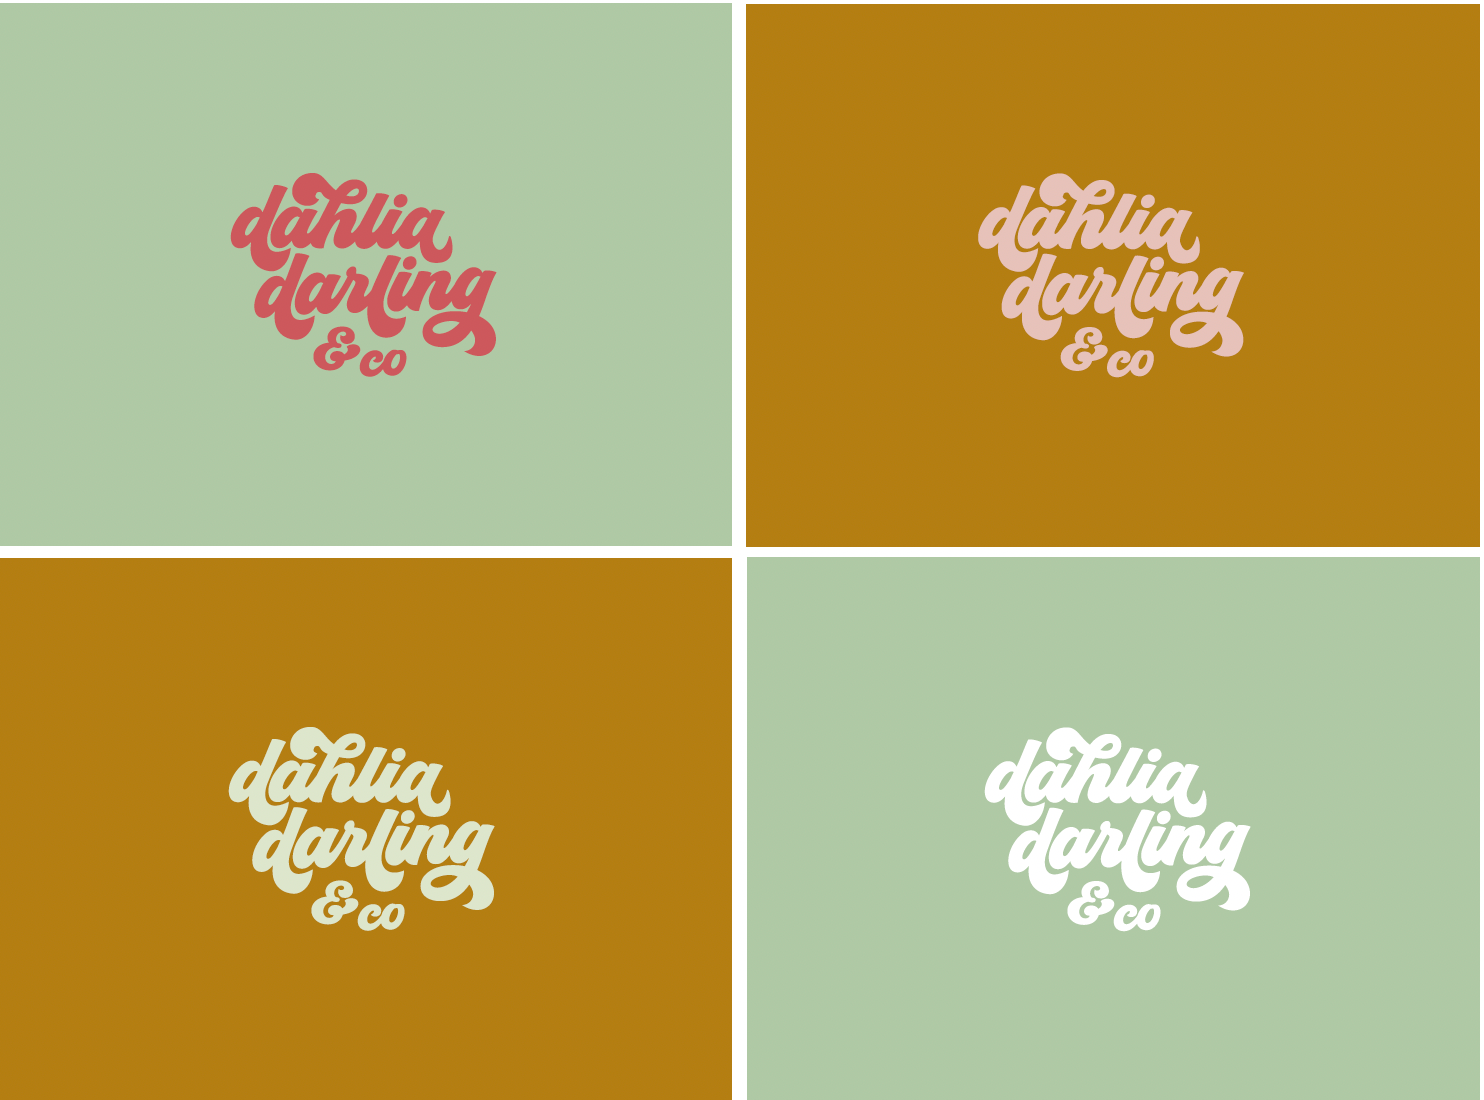 A collage of four different colored logos for a company called dahlia darling.